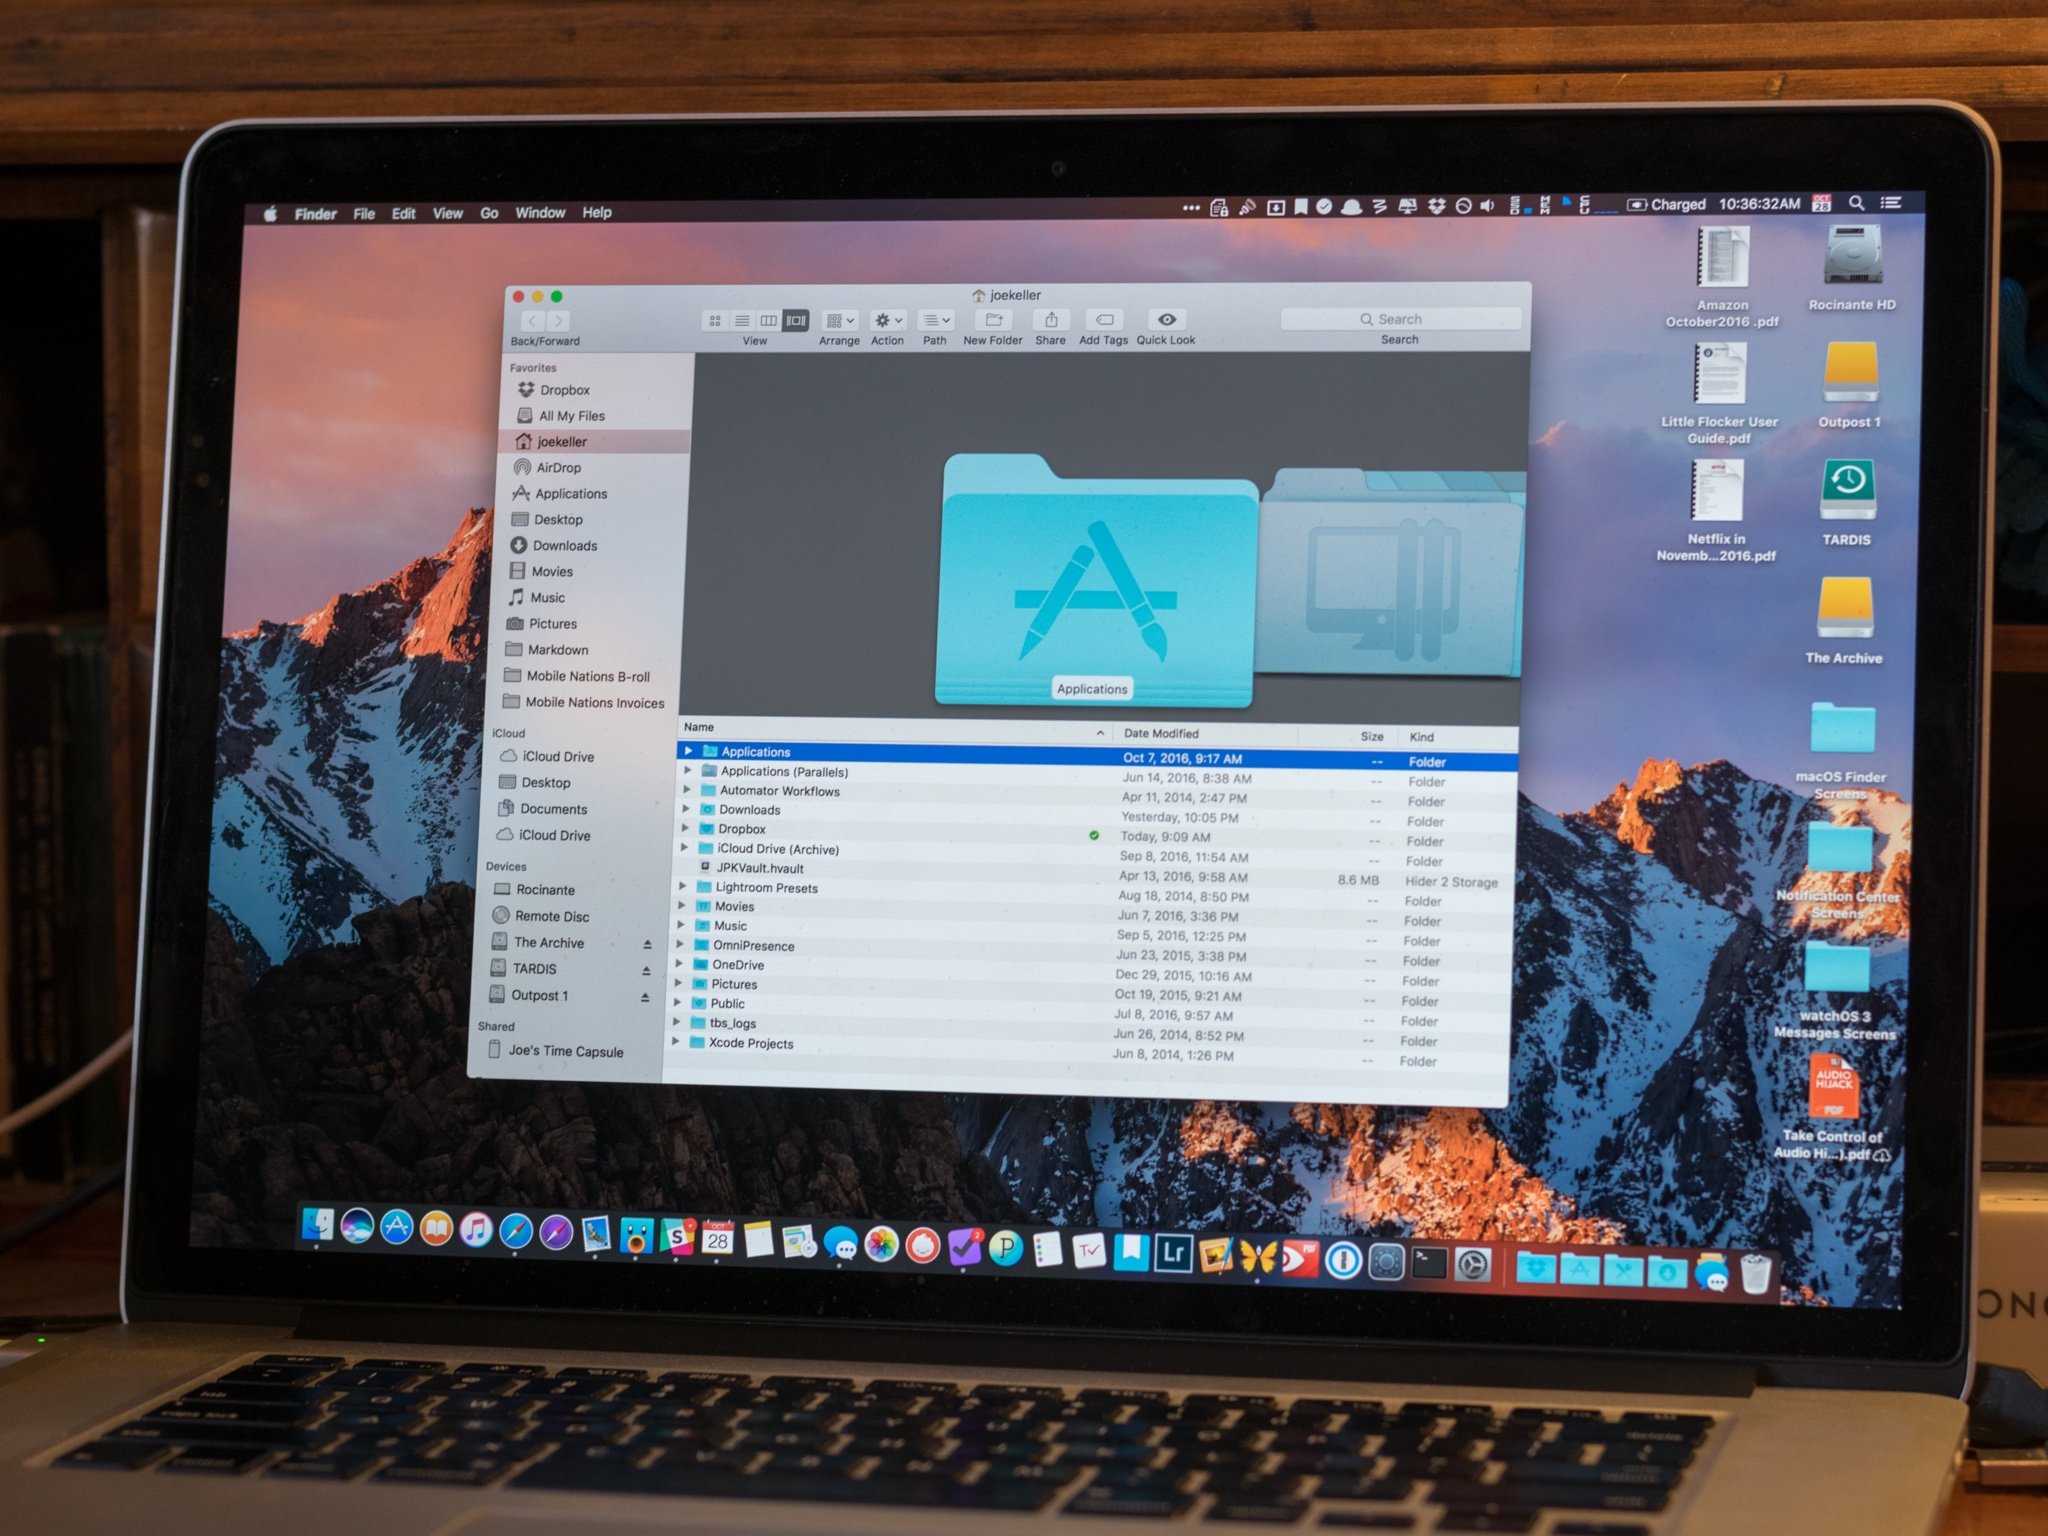 Using The Finder On Your Mac